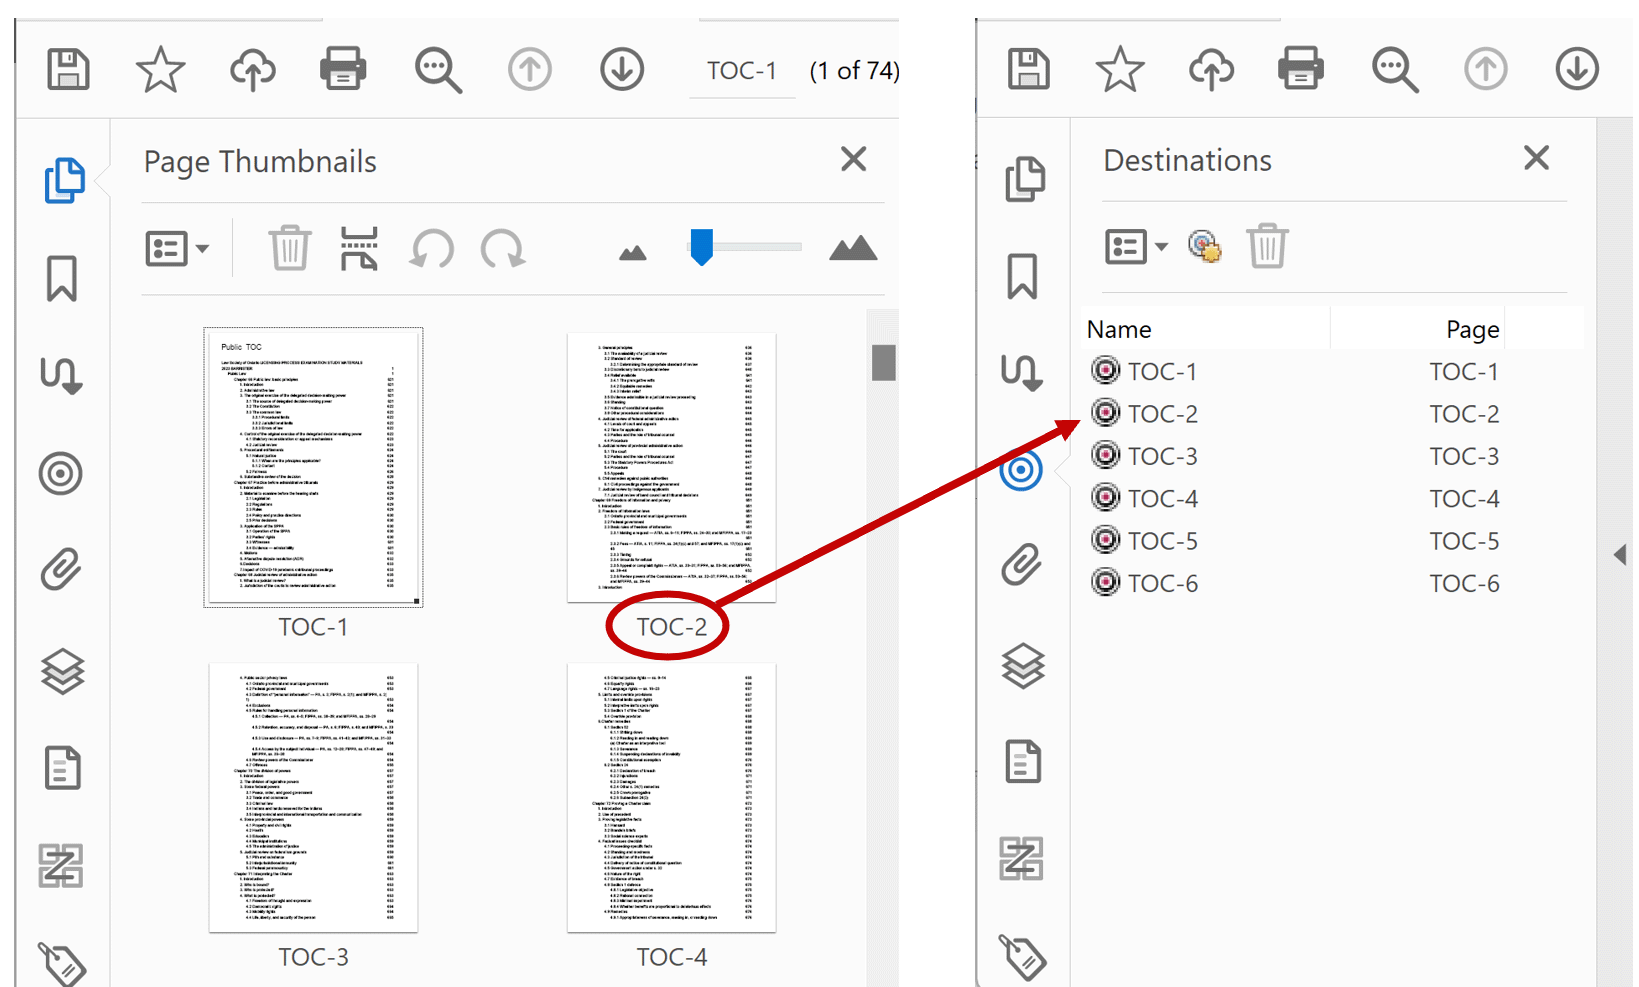 Create named destinations from page labels in PDF files